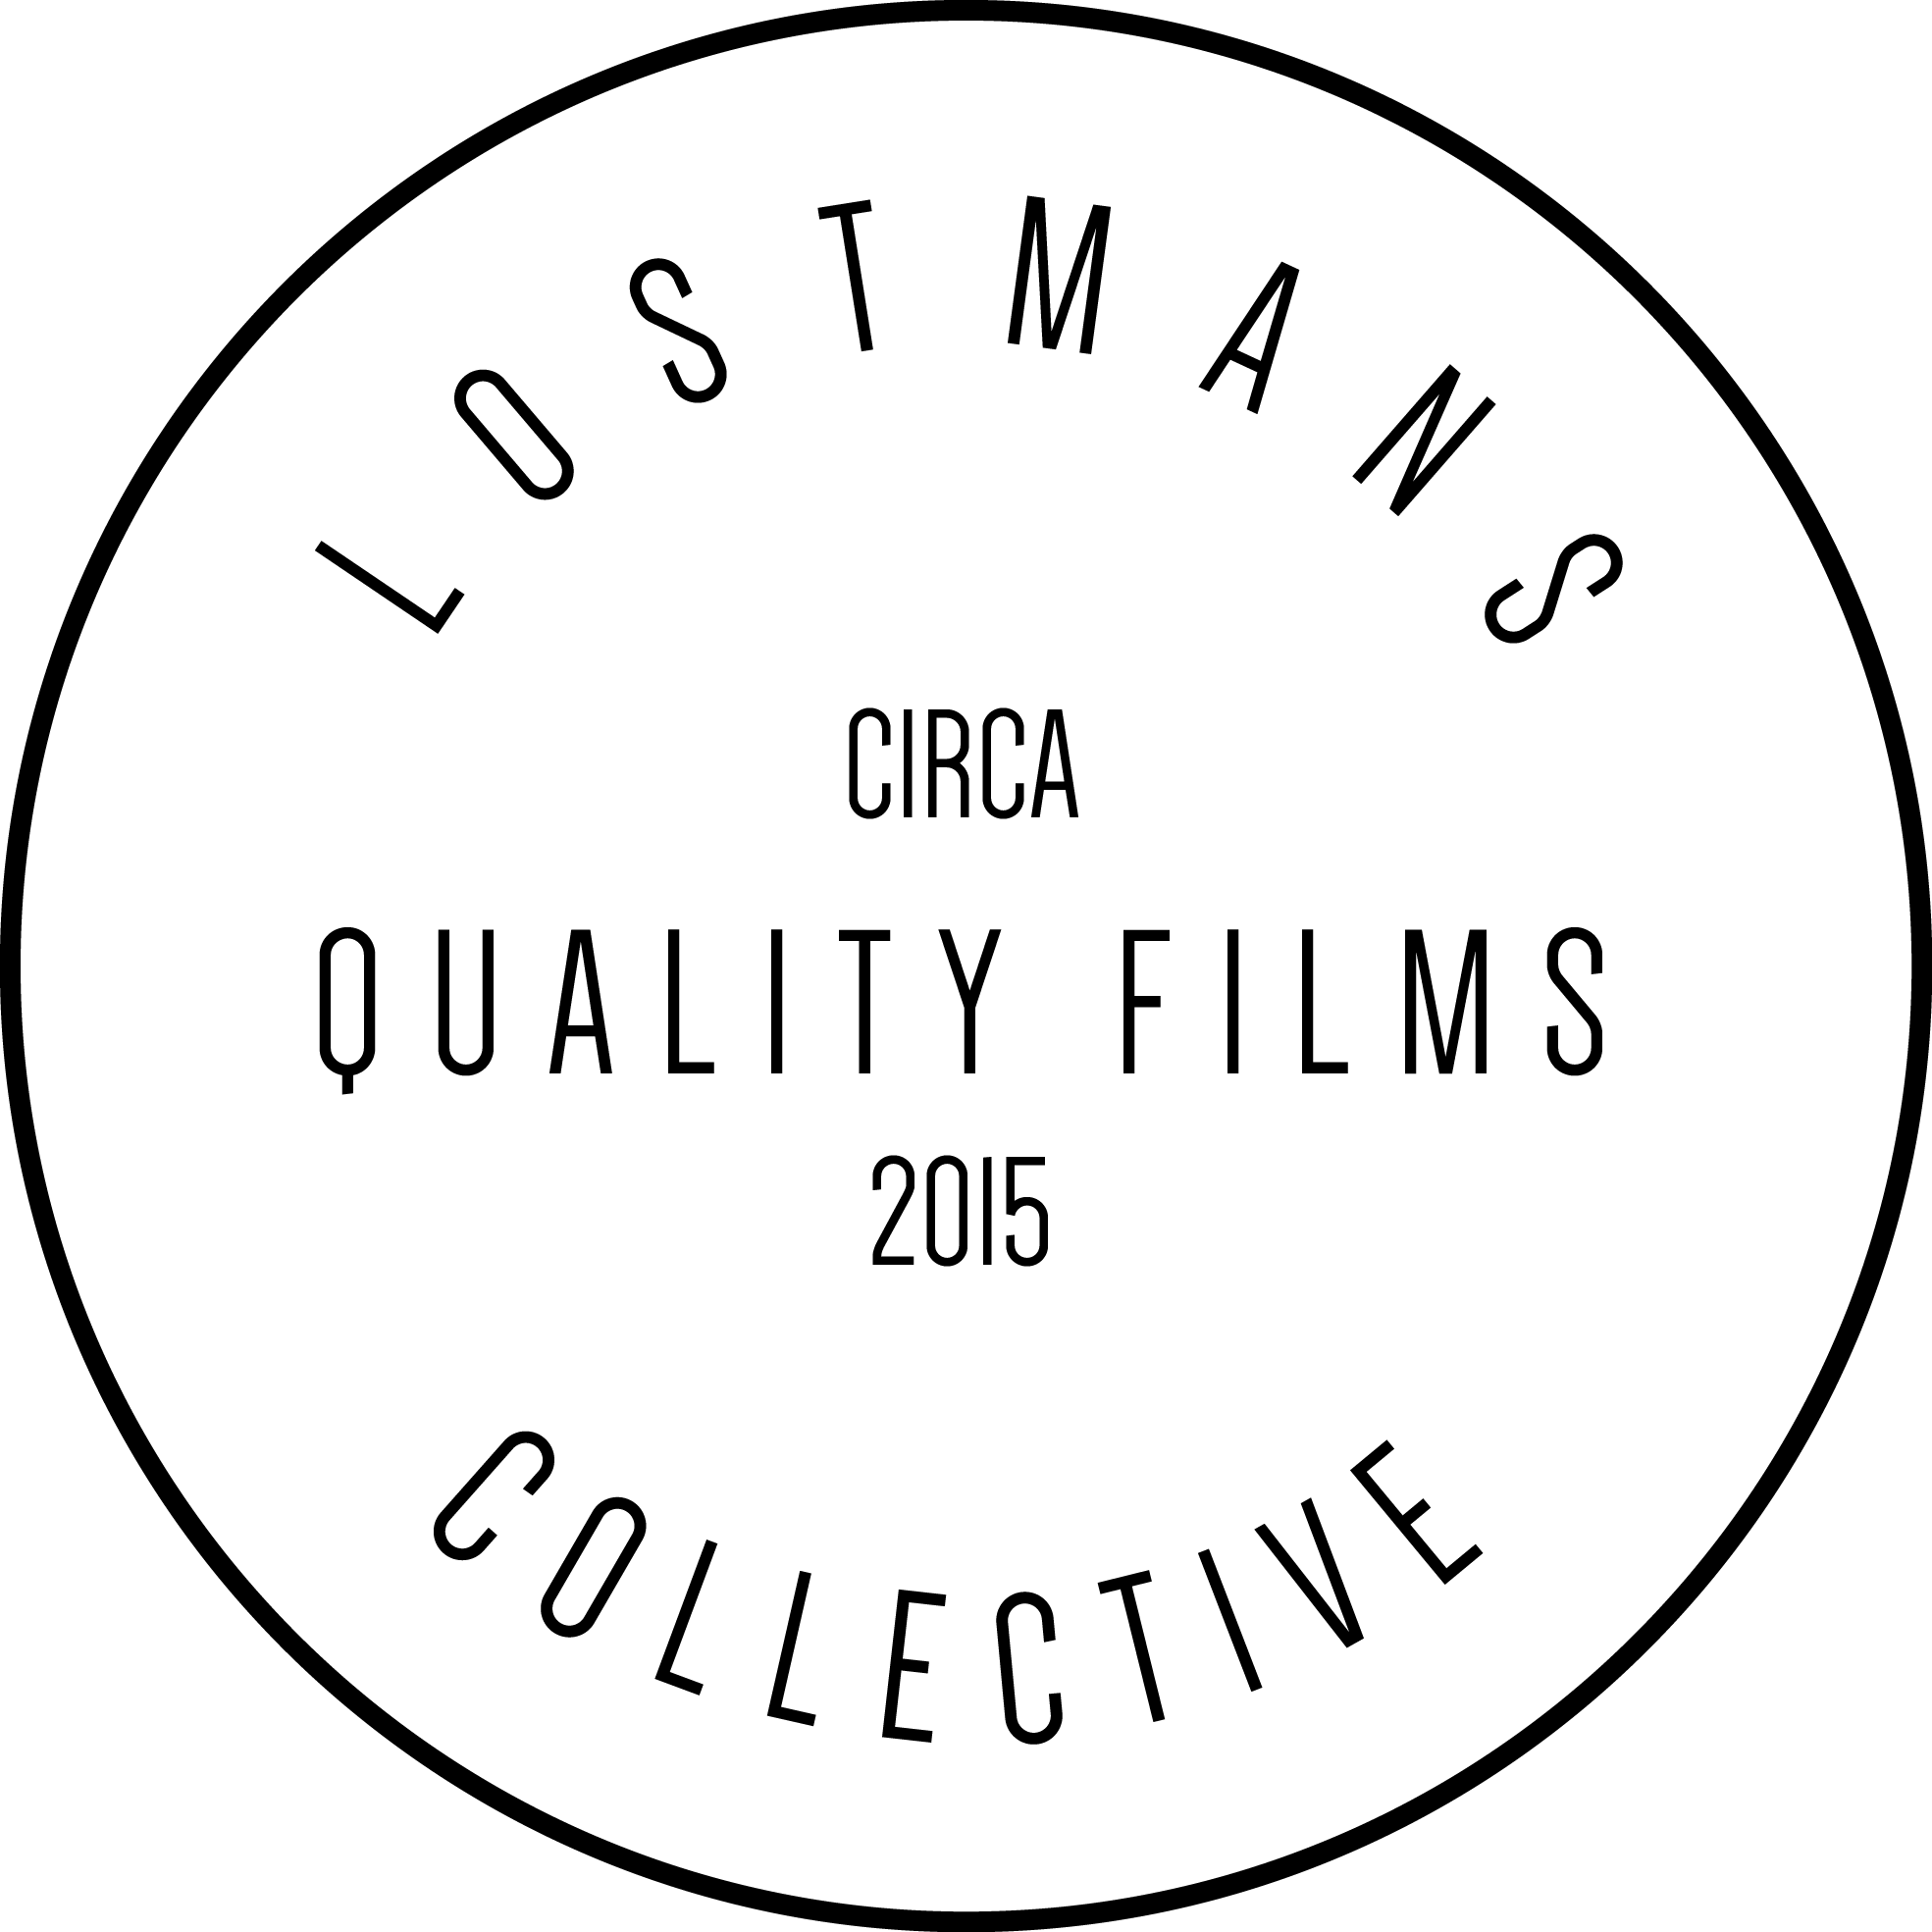 LOSTMANS COLLECTIVE